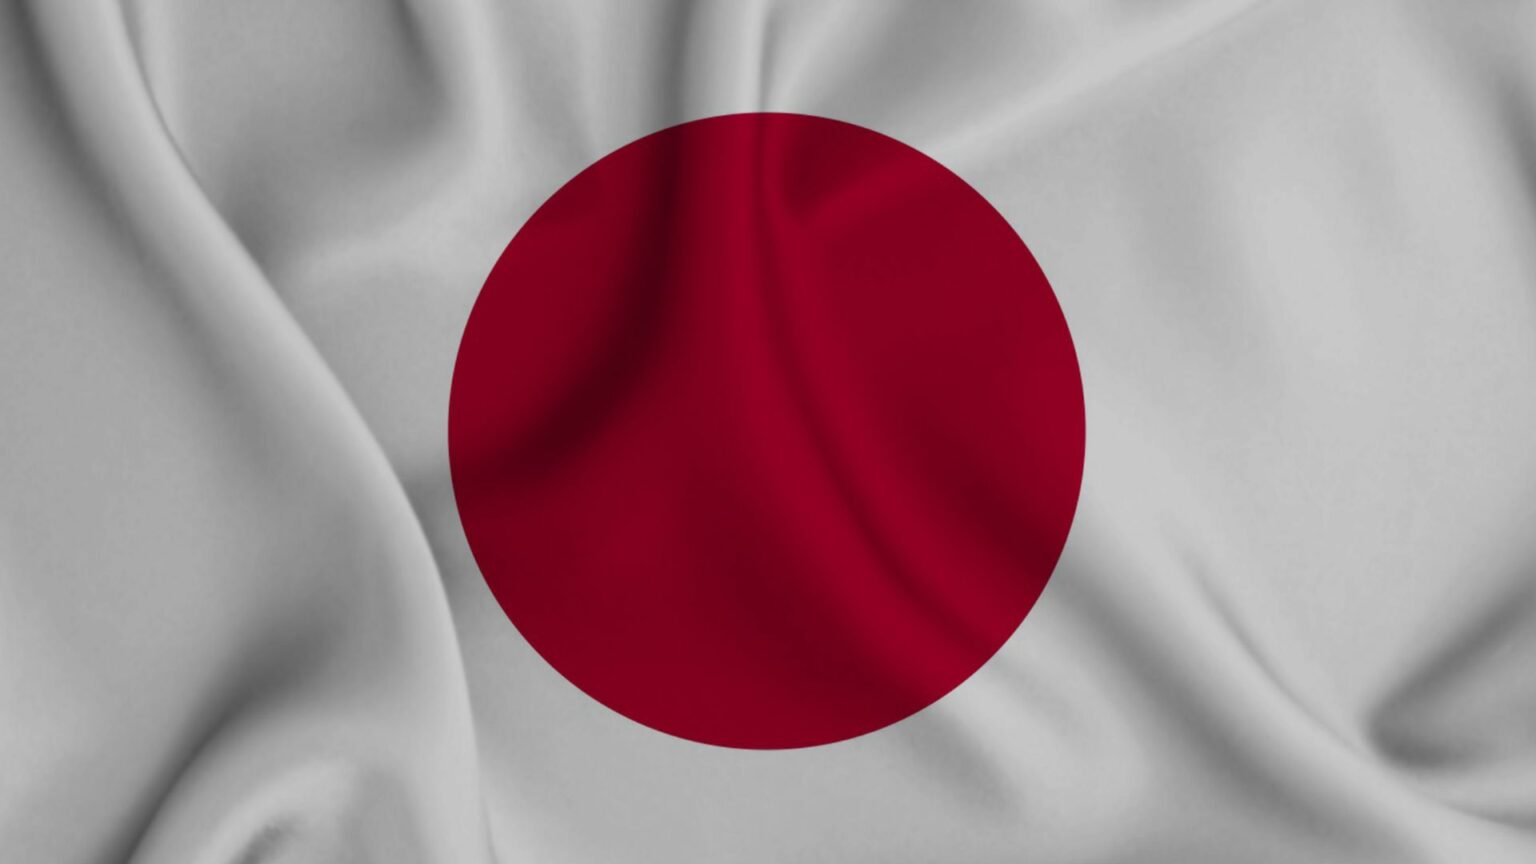 INPEX Invests in Liquefied Hydrogen Venture for Japan's Clean Energy Future